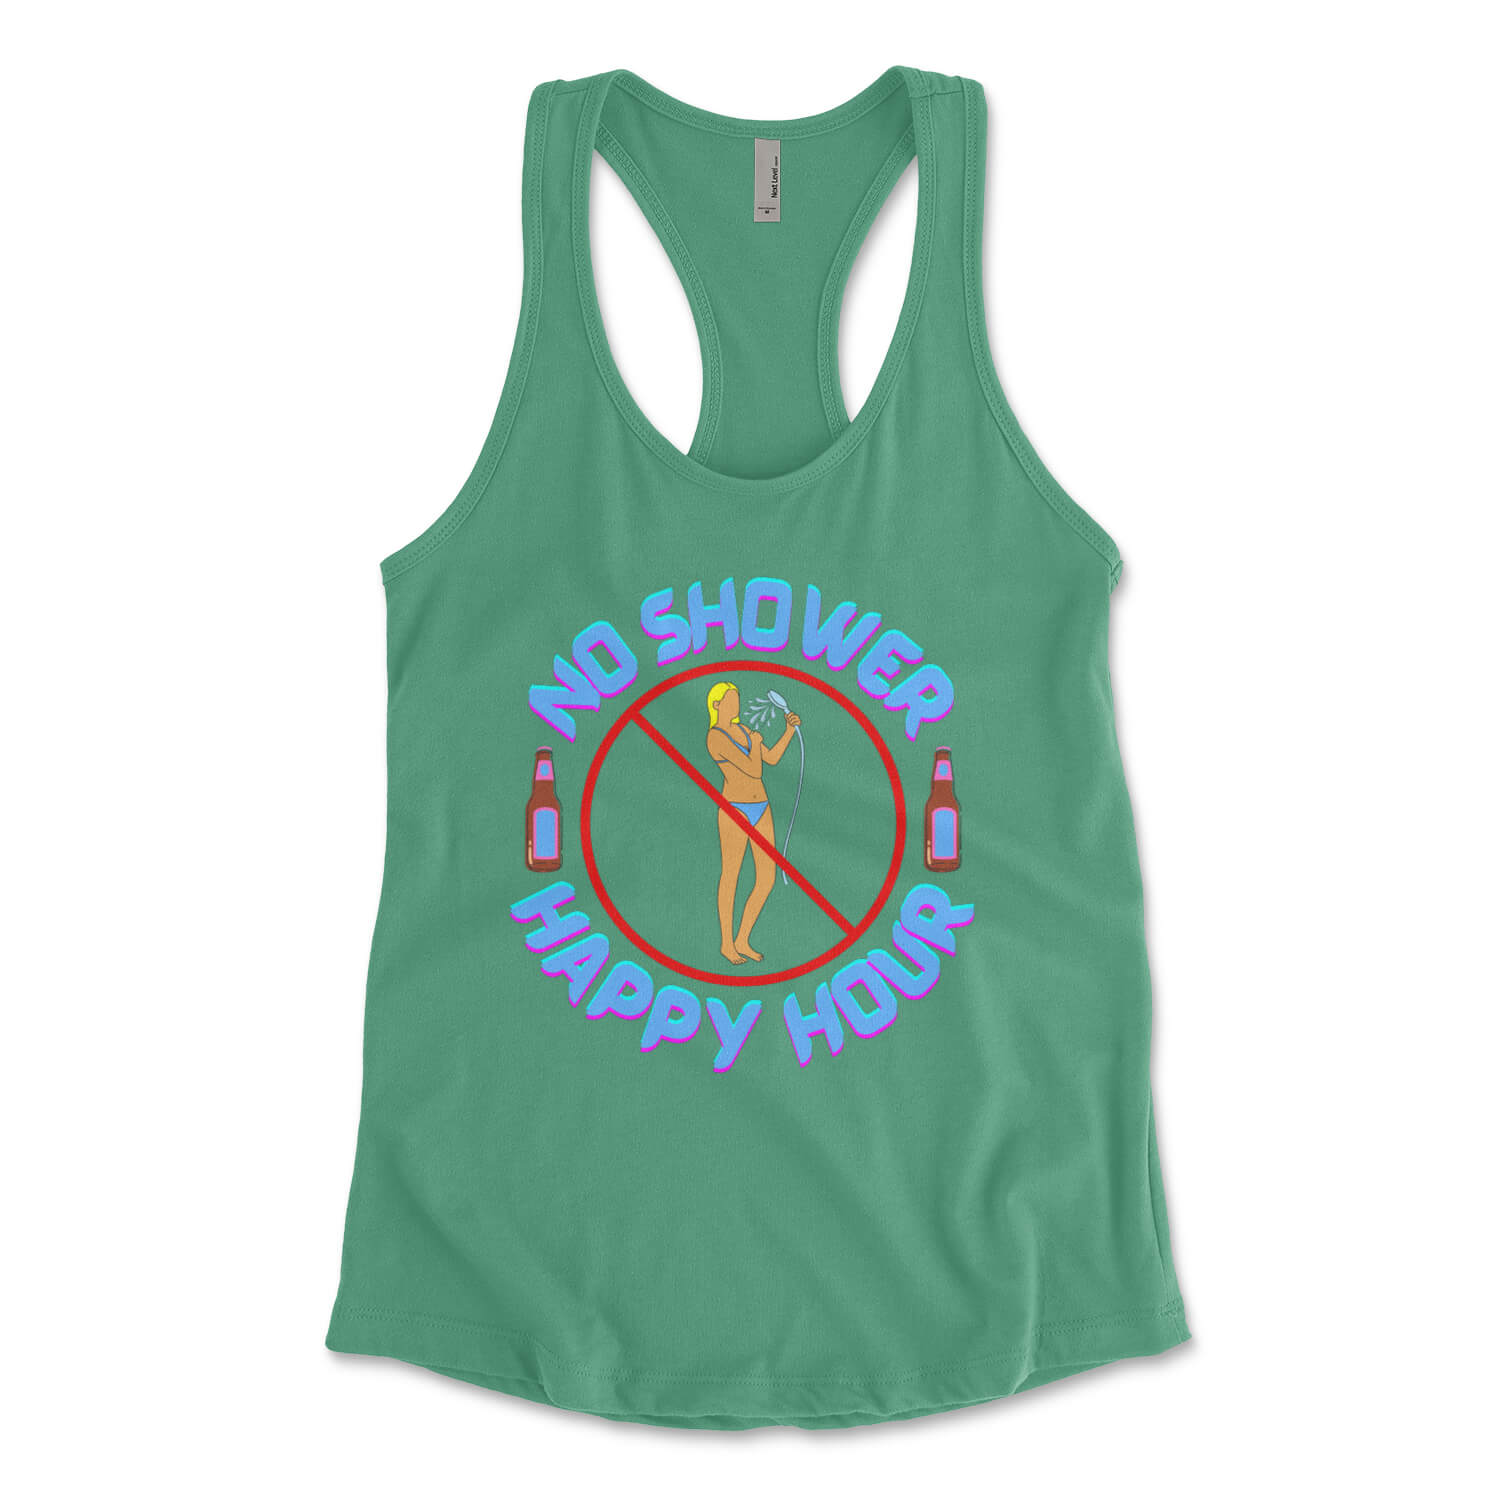 No shower happy hour sea isle city new jersey green womens tank top Phillygoat